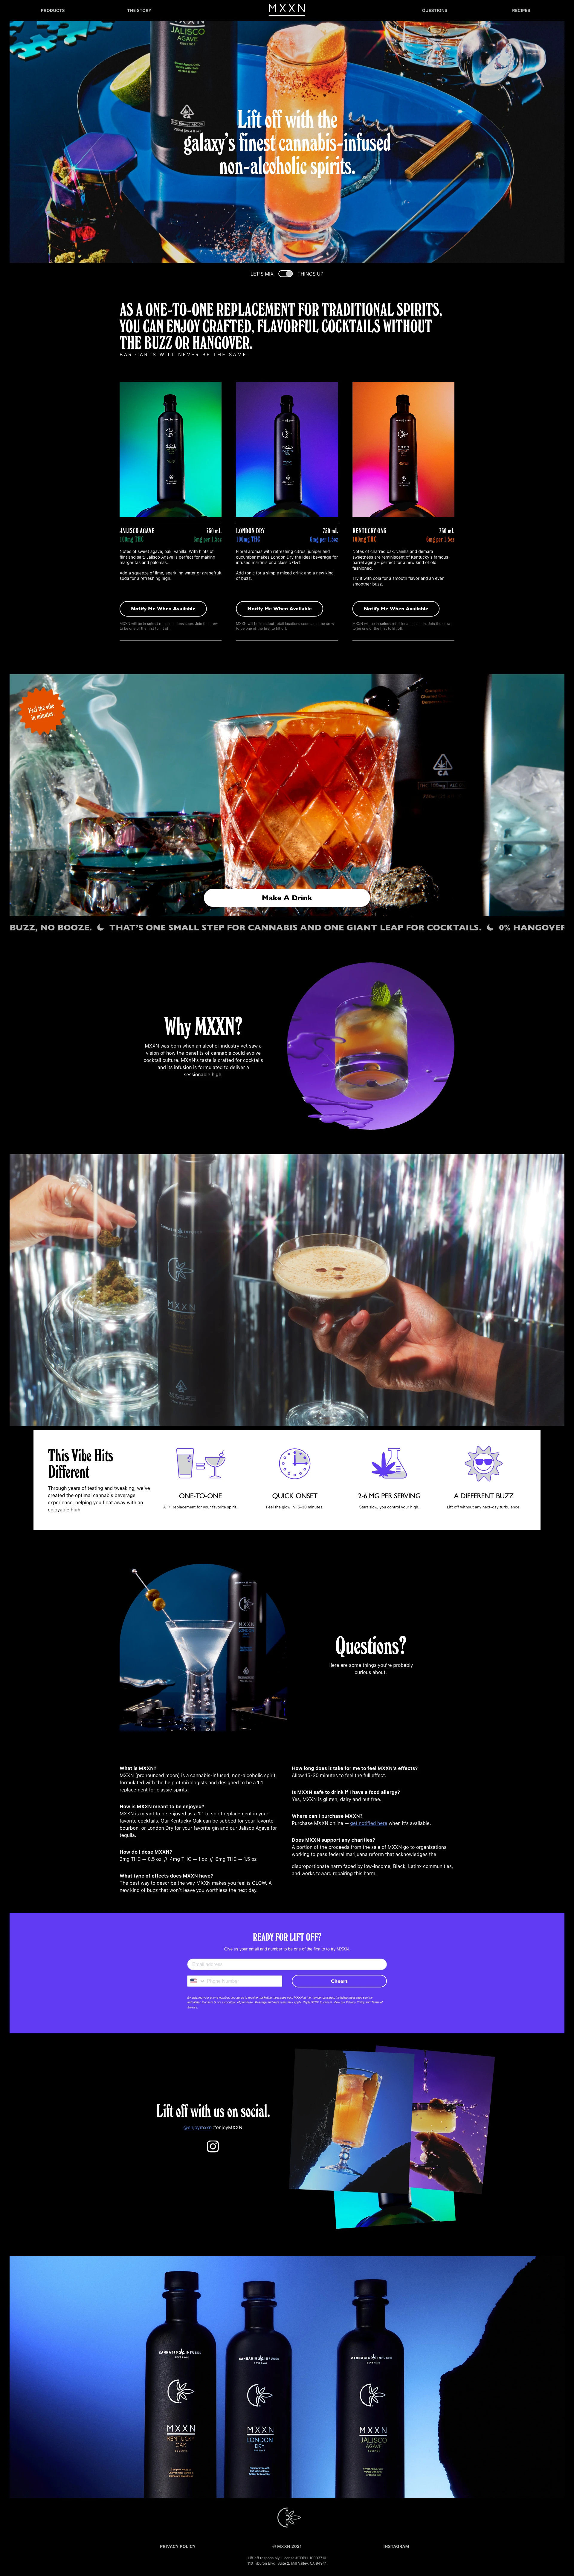 MXXN Landing Page Example: As a one-to-one replacement for traditional spirits, you can enjoy crafted, flavorful cocktails without the buzz or hangover. Bar carts will never be the same. Why MXXN? MXXN was born when an alcohol-industry vet saw a vision of how the benefits of cannabis could evolve cocktail culture.